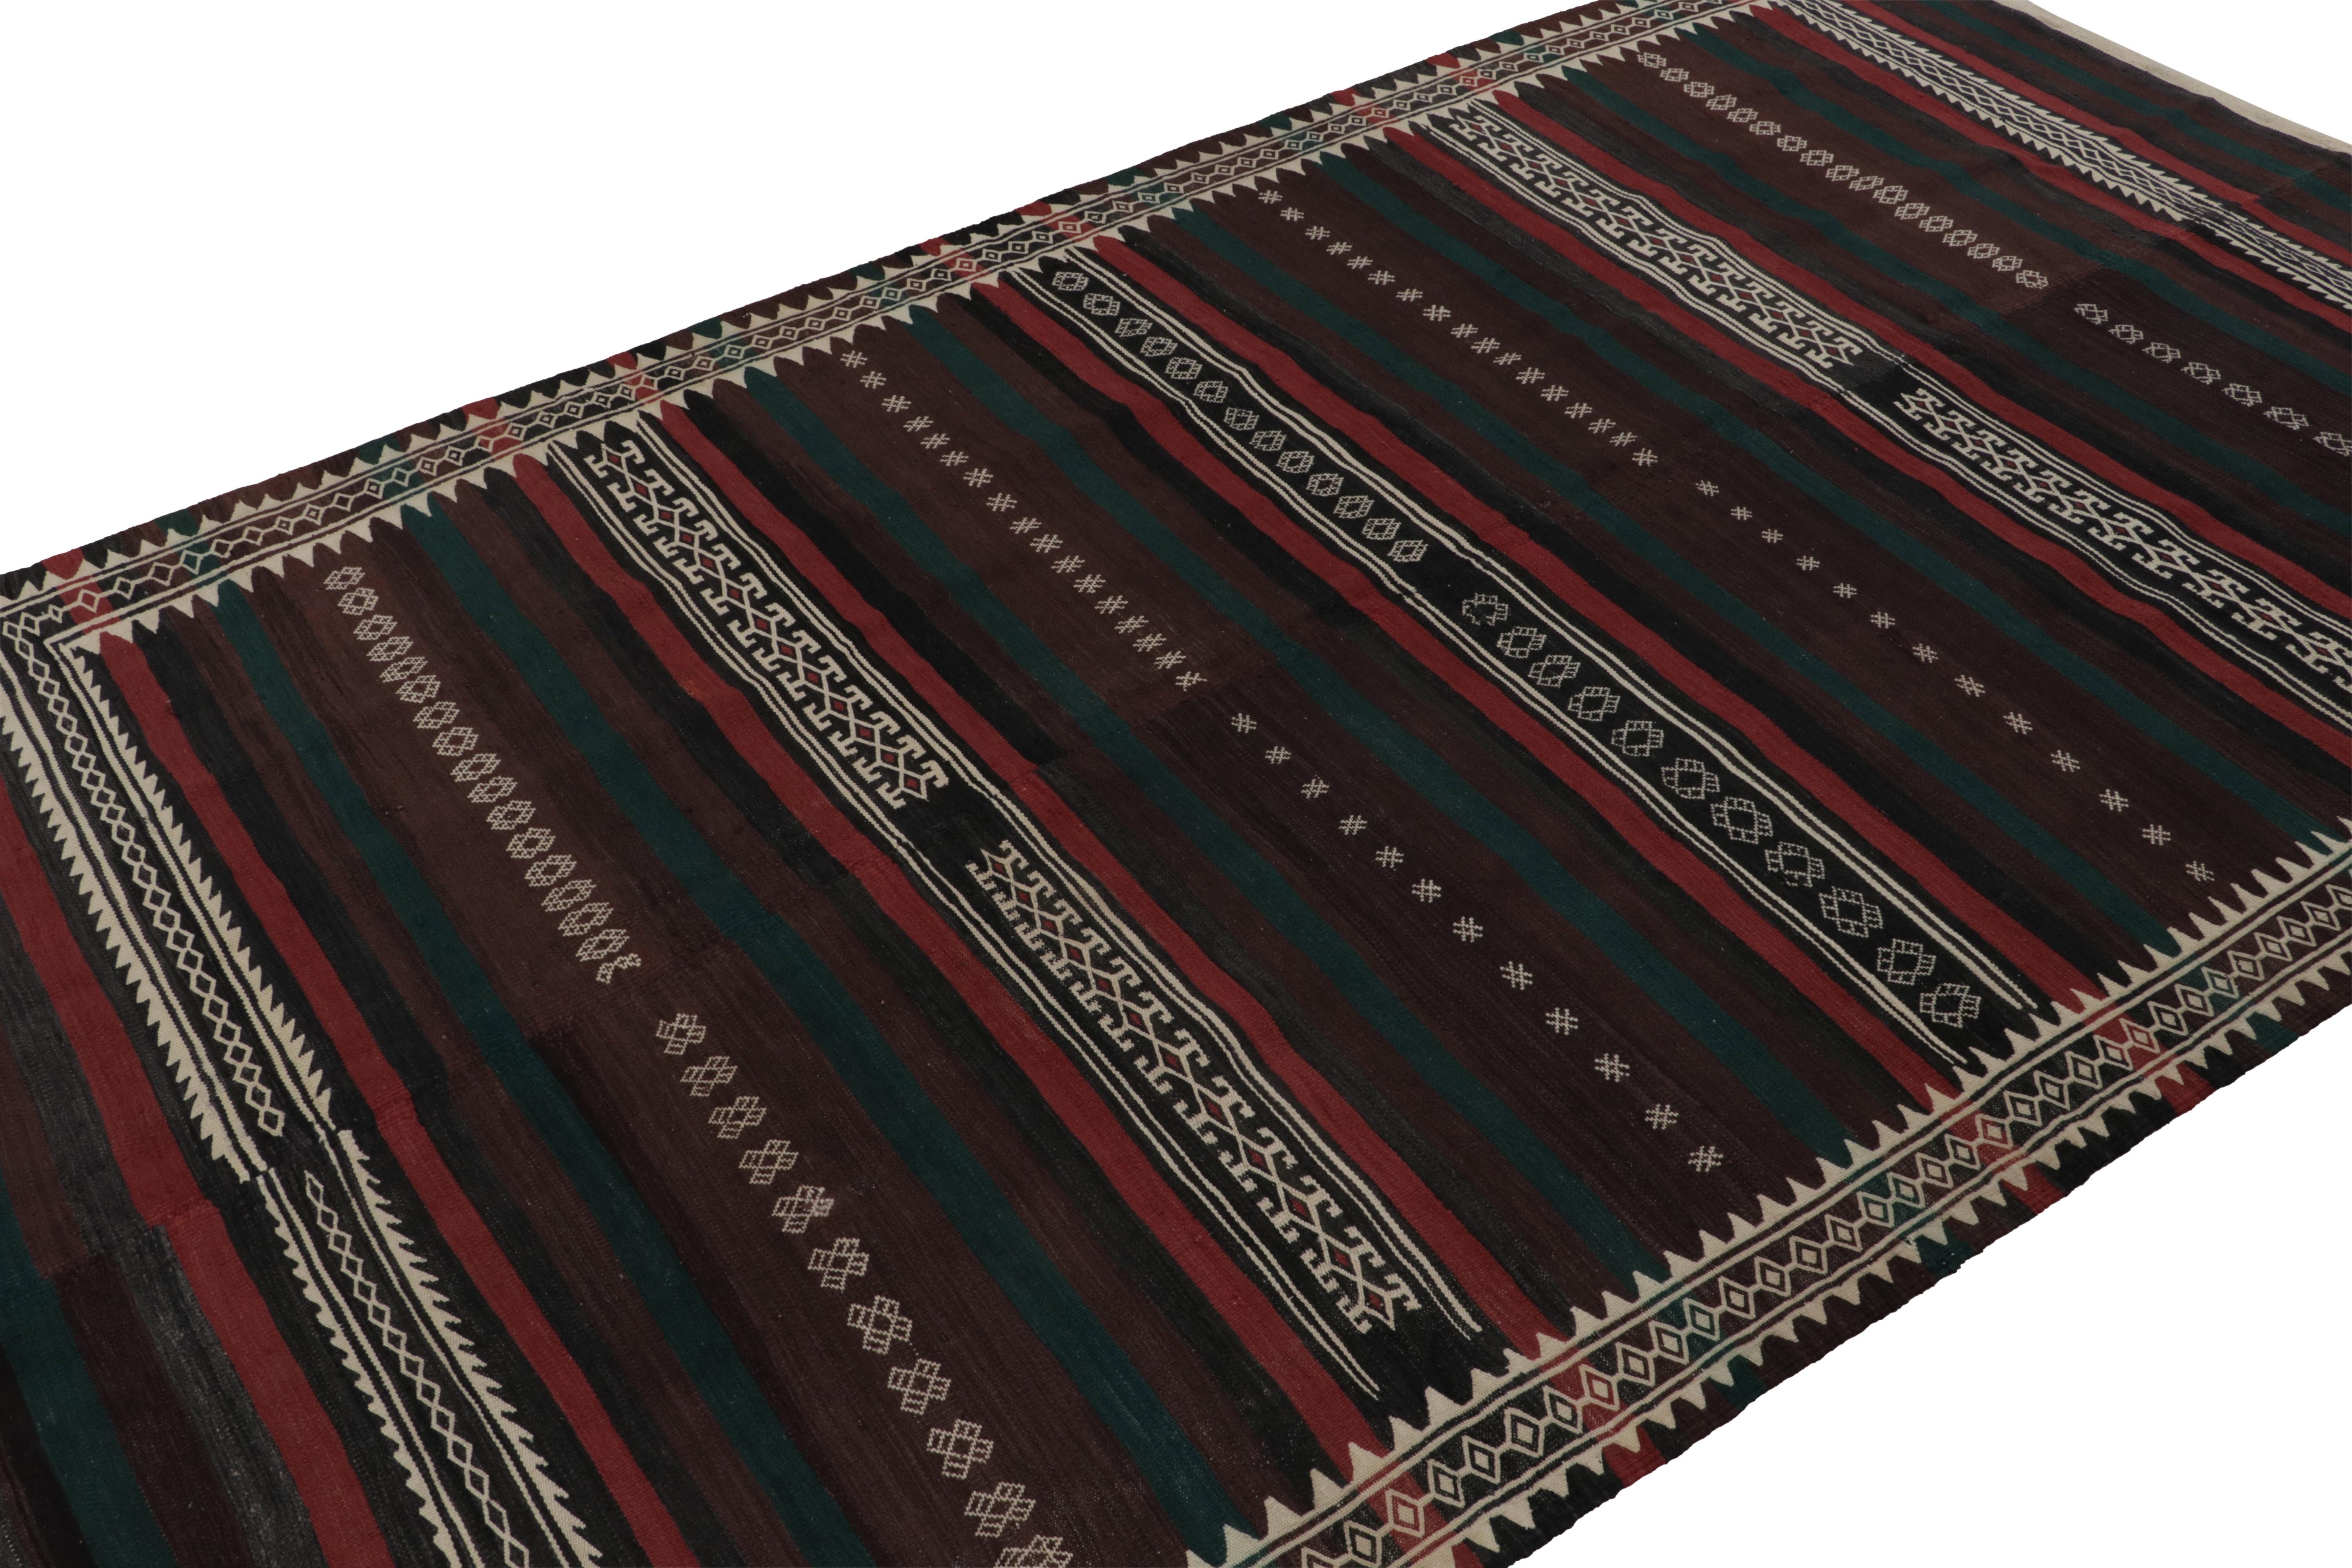 This vintage 6x10 Persian Kilim is a mid-century tribal rug - latest to join our Kilim & Flatweave collection. 

On the Design:

Handwoven in wool circa 1950-1960, the flatweave enjoys tribal patterns in red & brown. The color variations blend